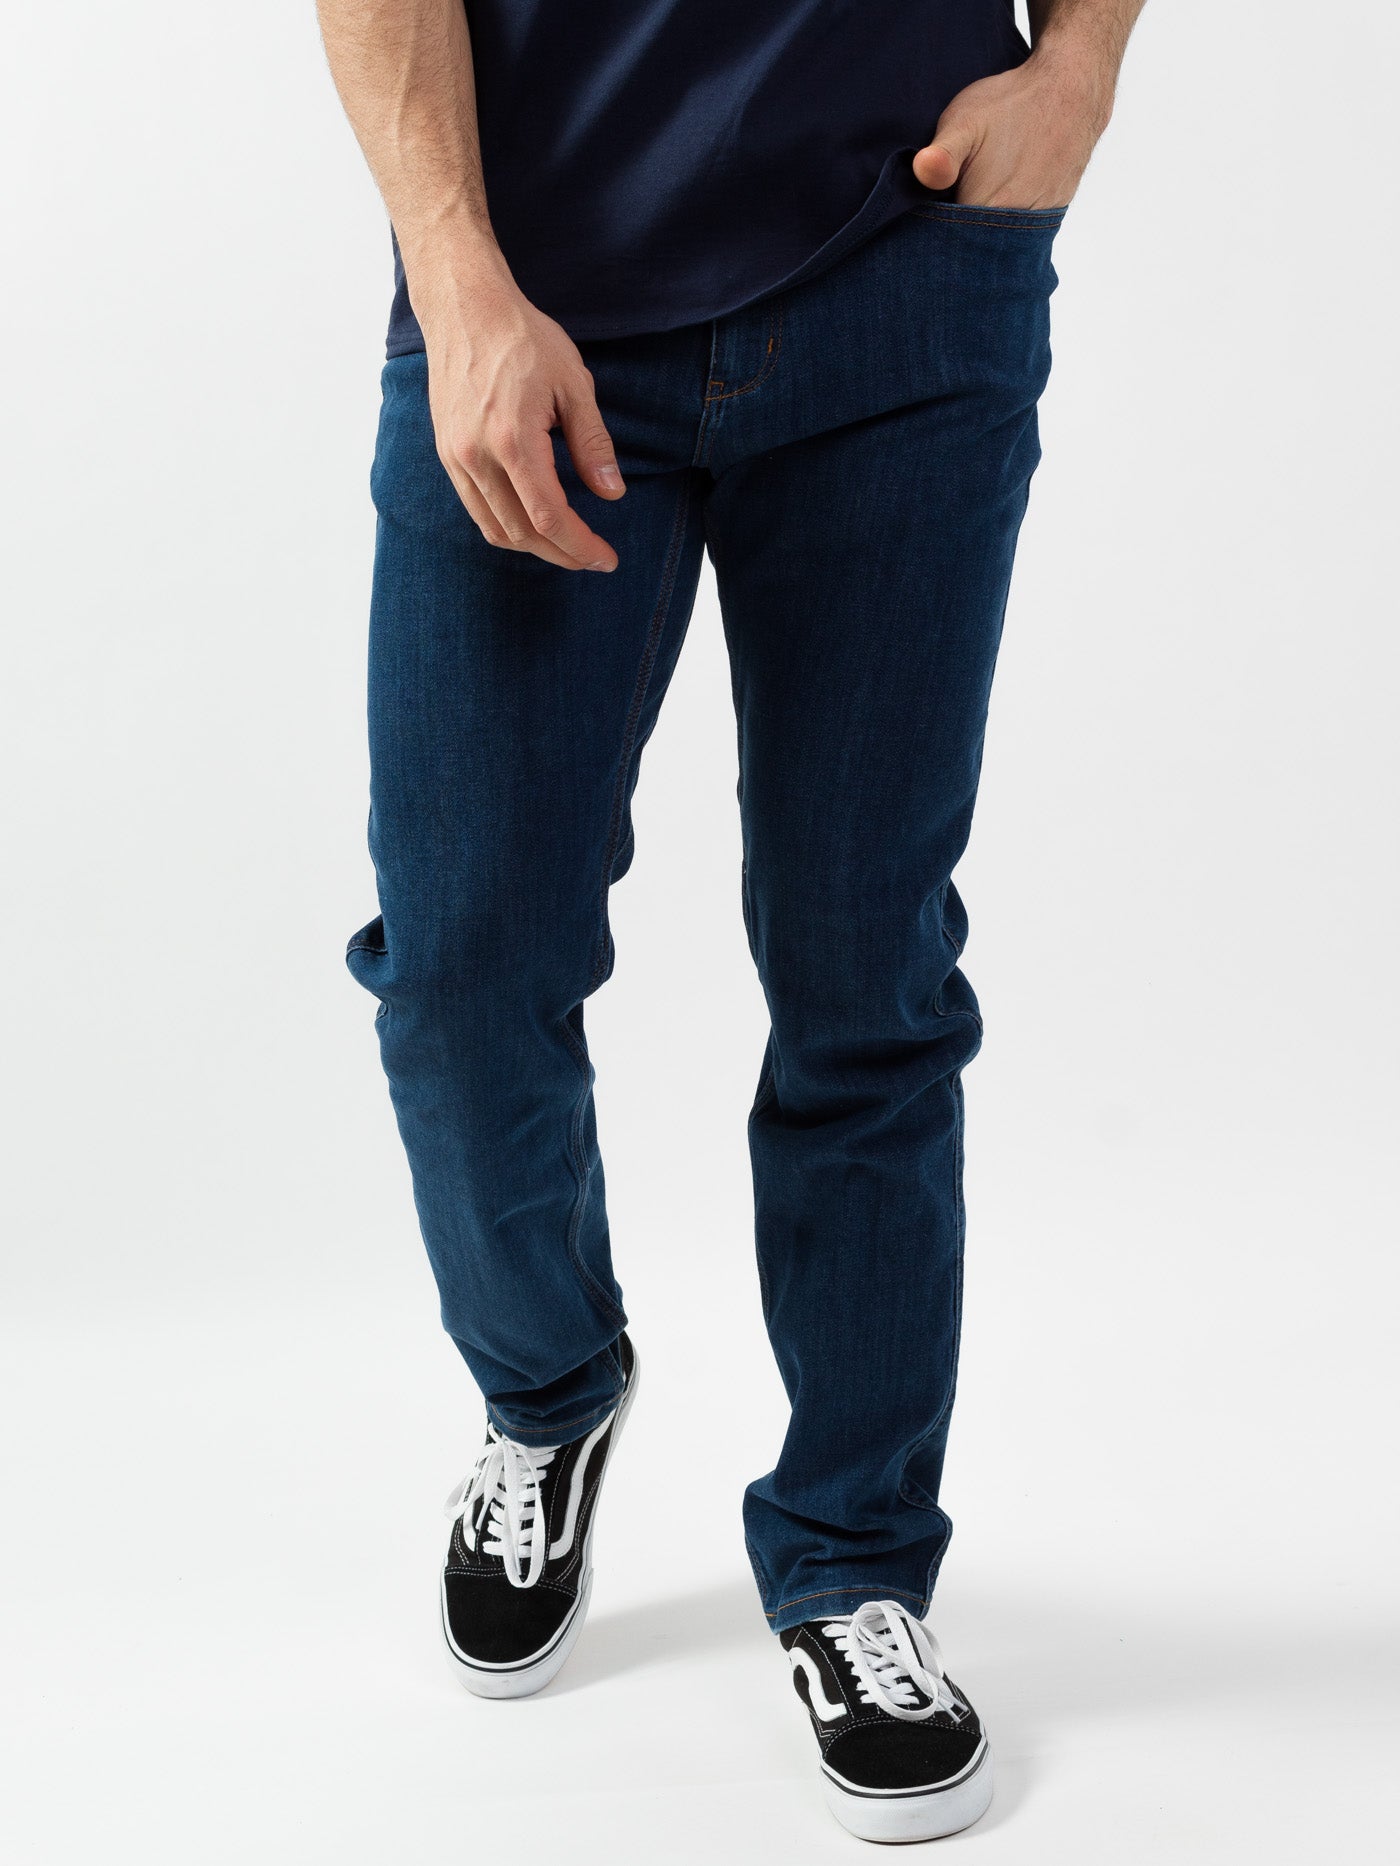 Men's Duer Performance Denim Relaxed Fit | Men's Everyday Trousers | George  FIsher